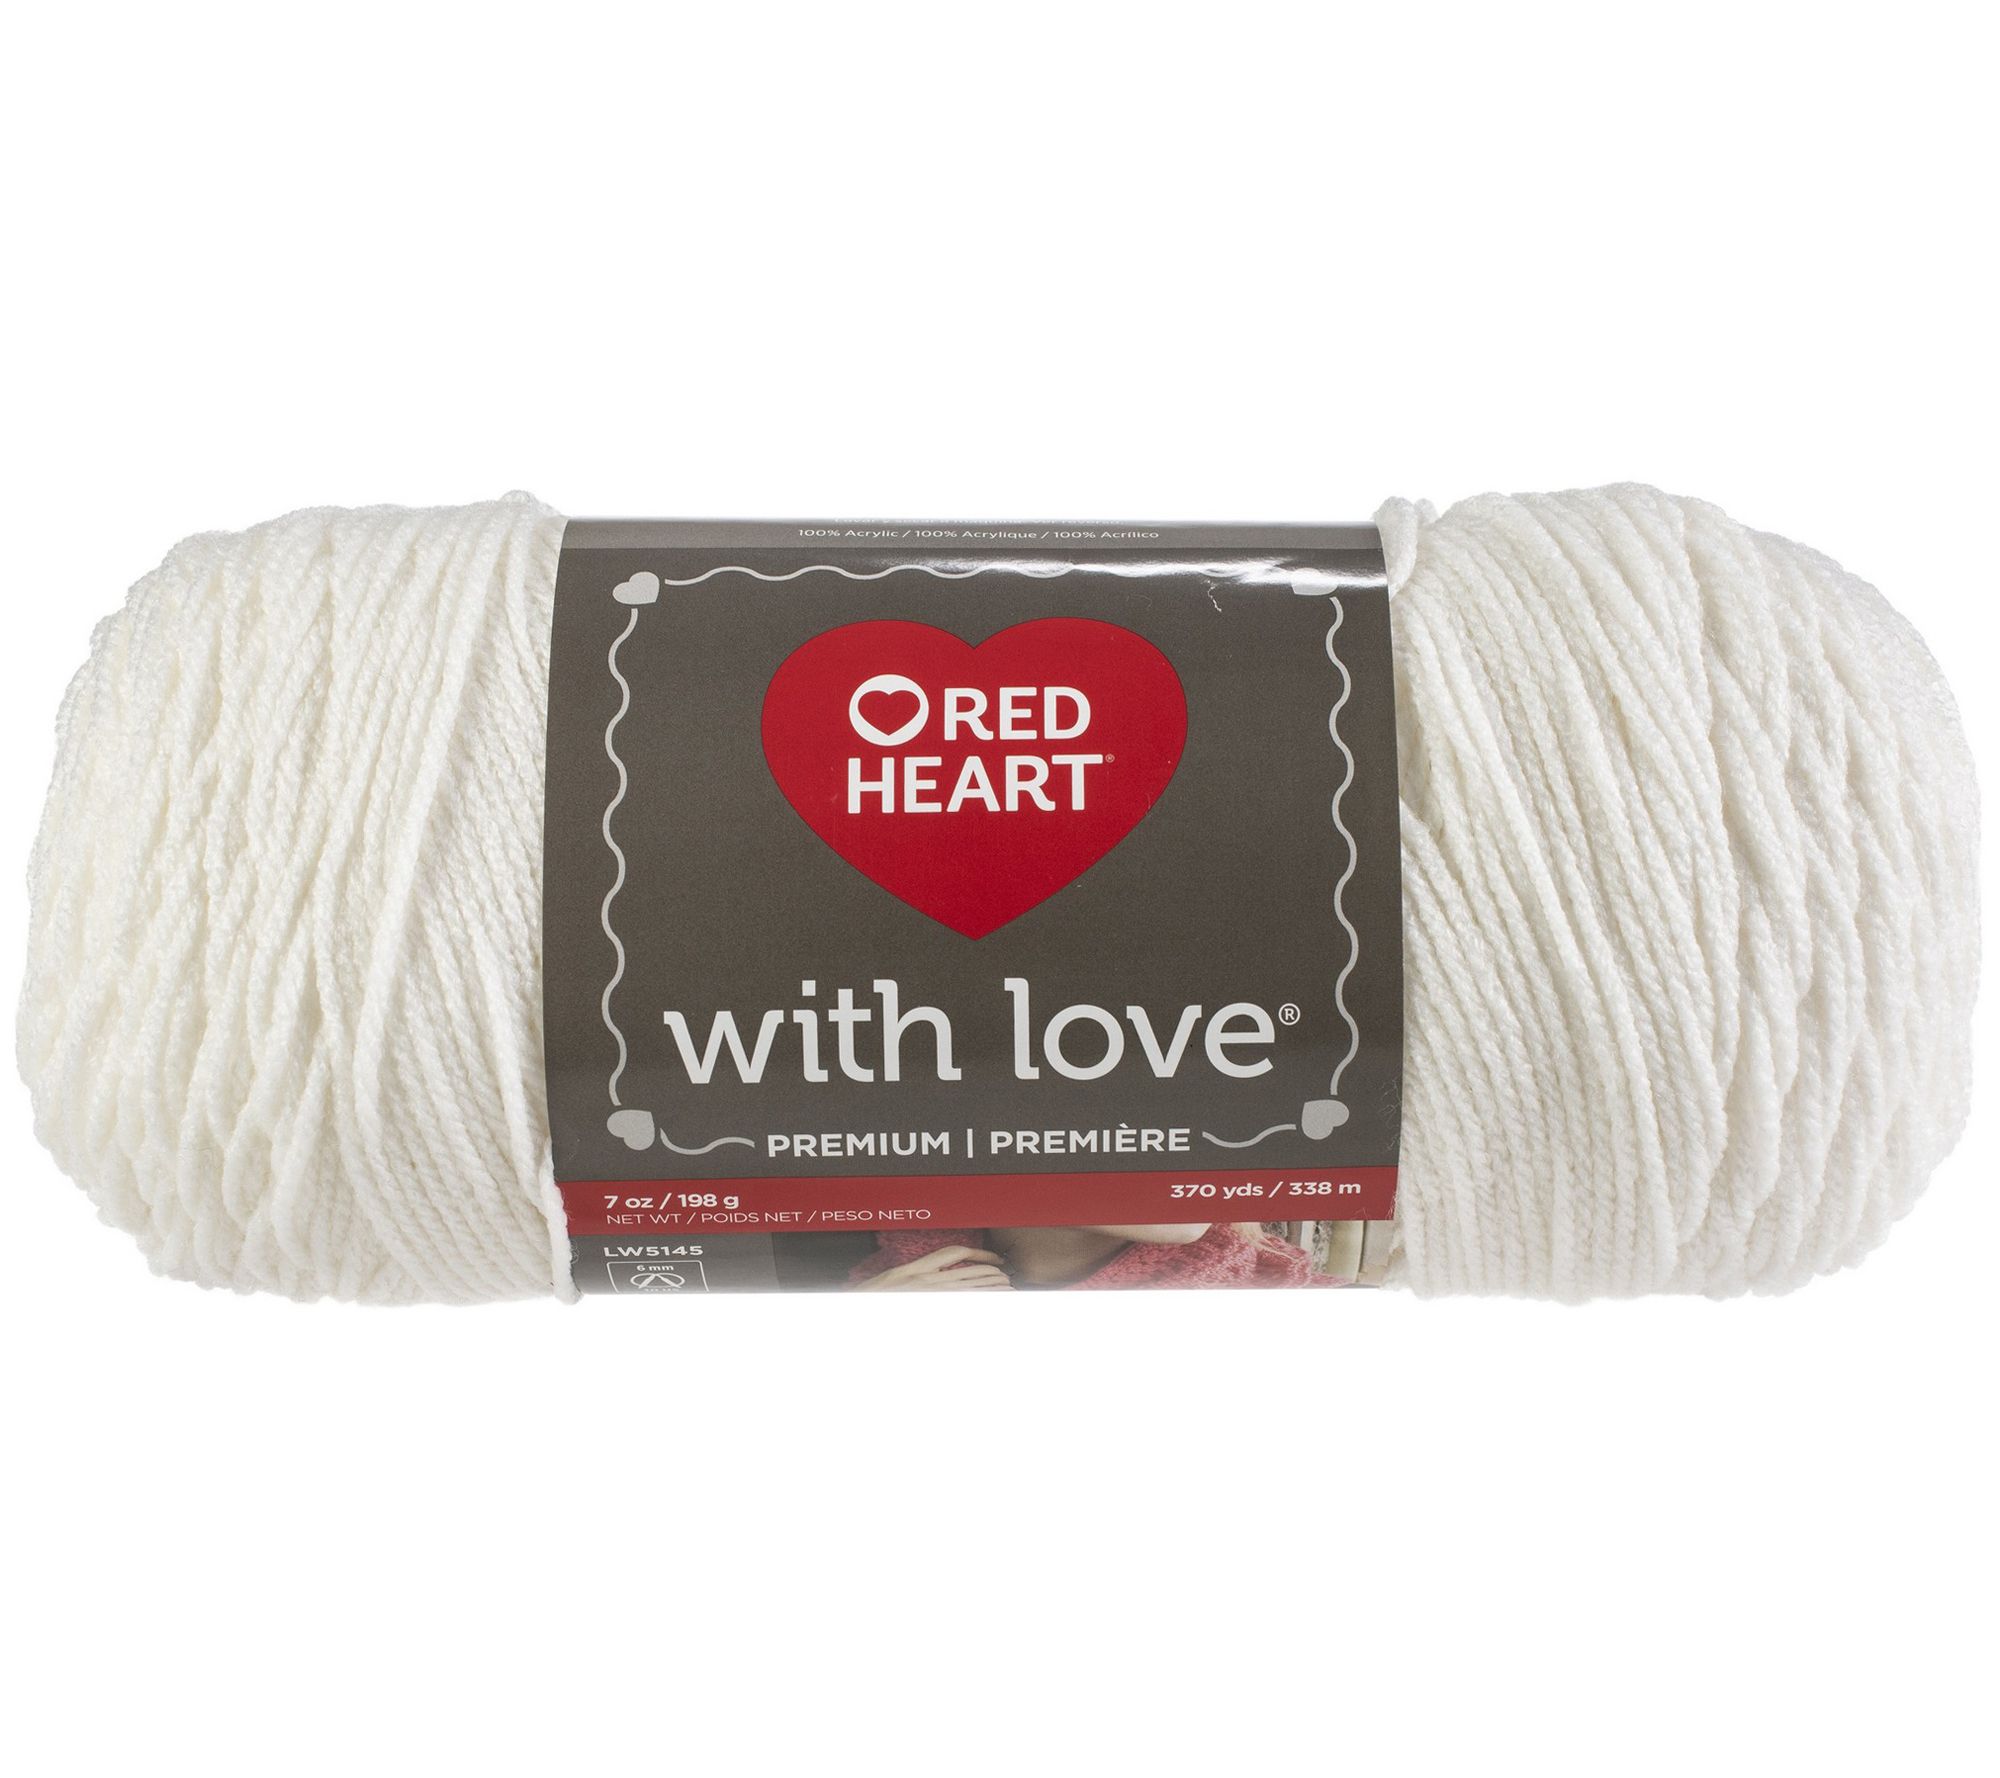 Red Heart with Love Light Gray Yarn - 2 Pack of 198g/7oz - Acrylic